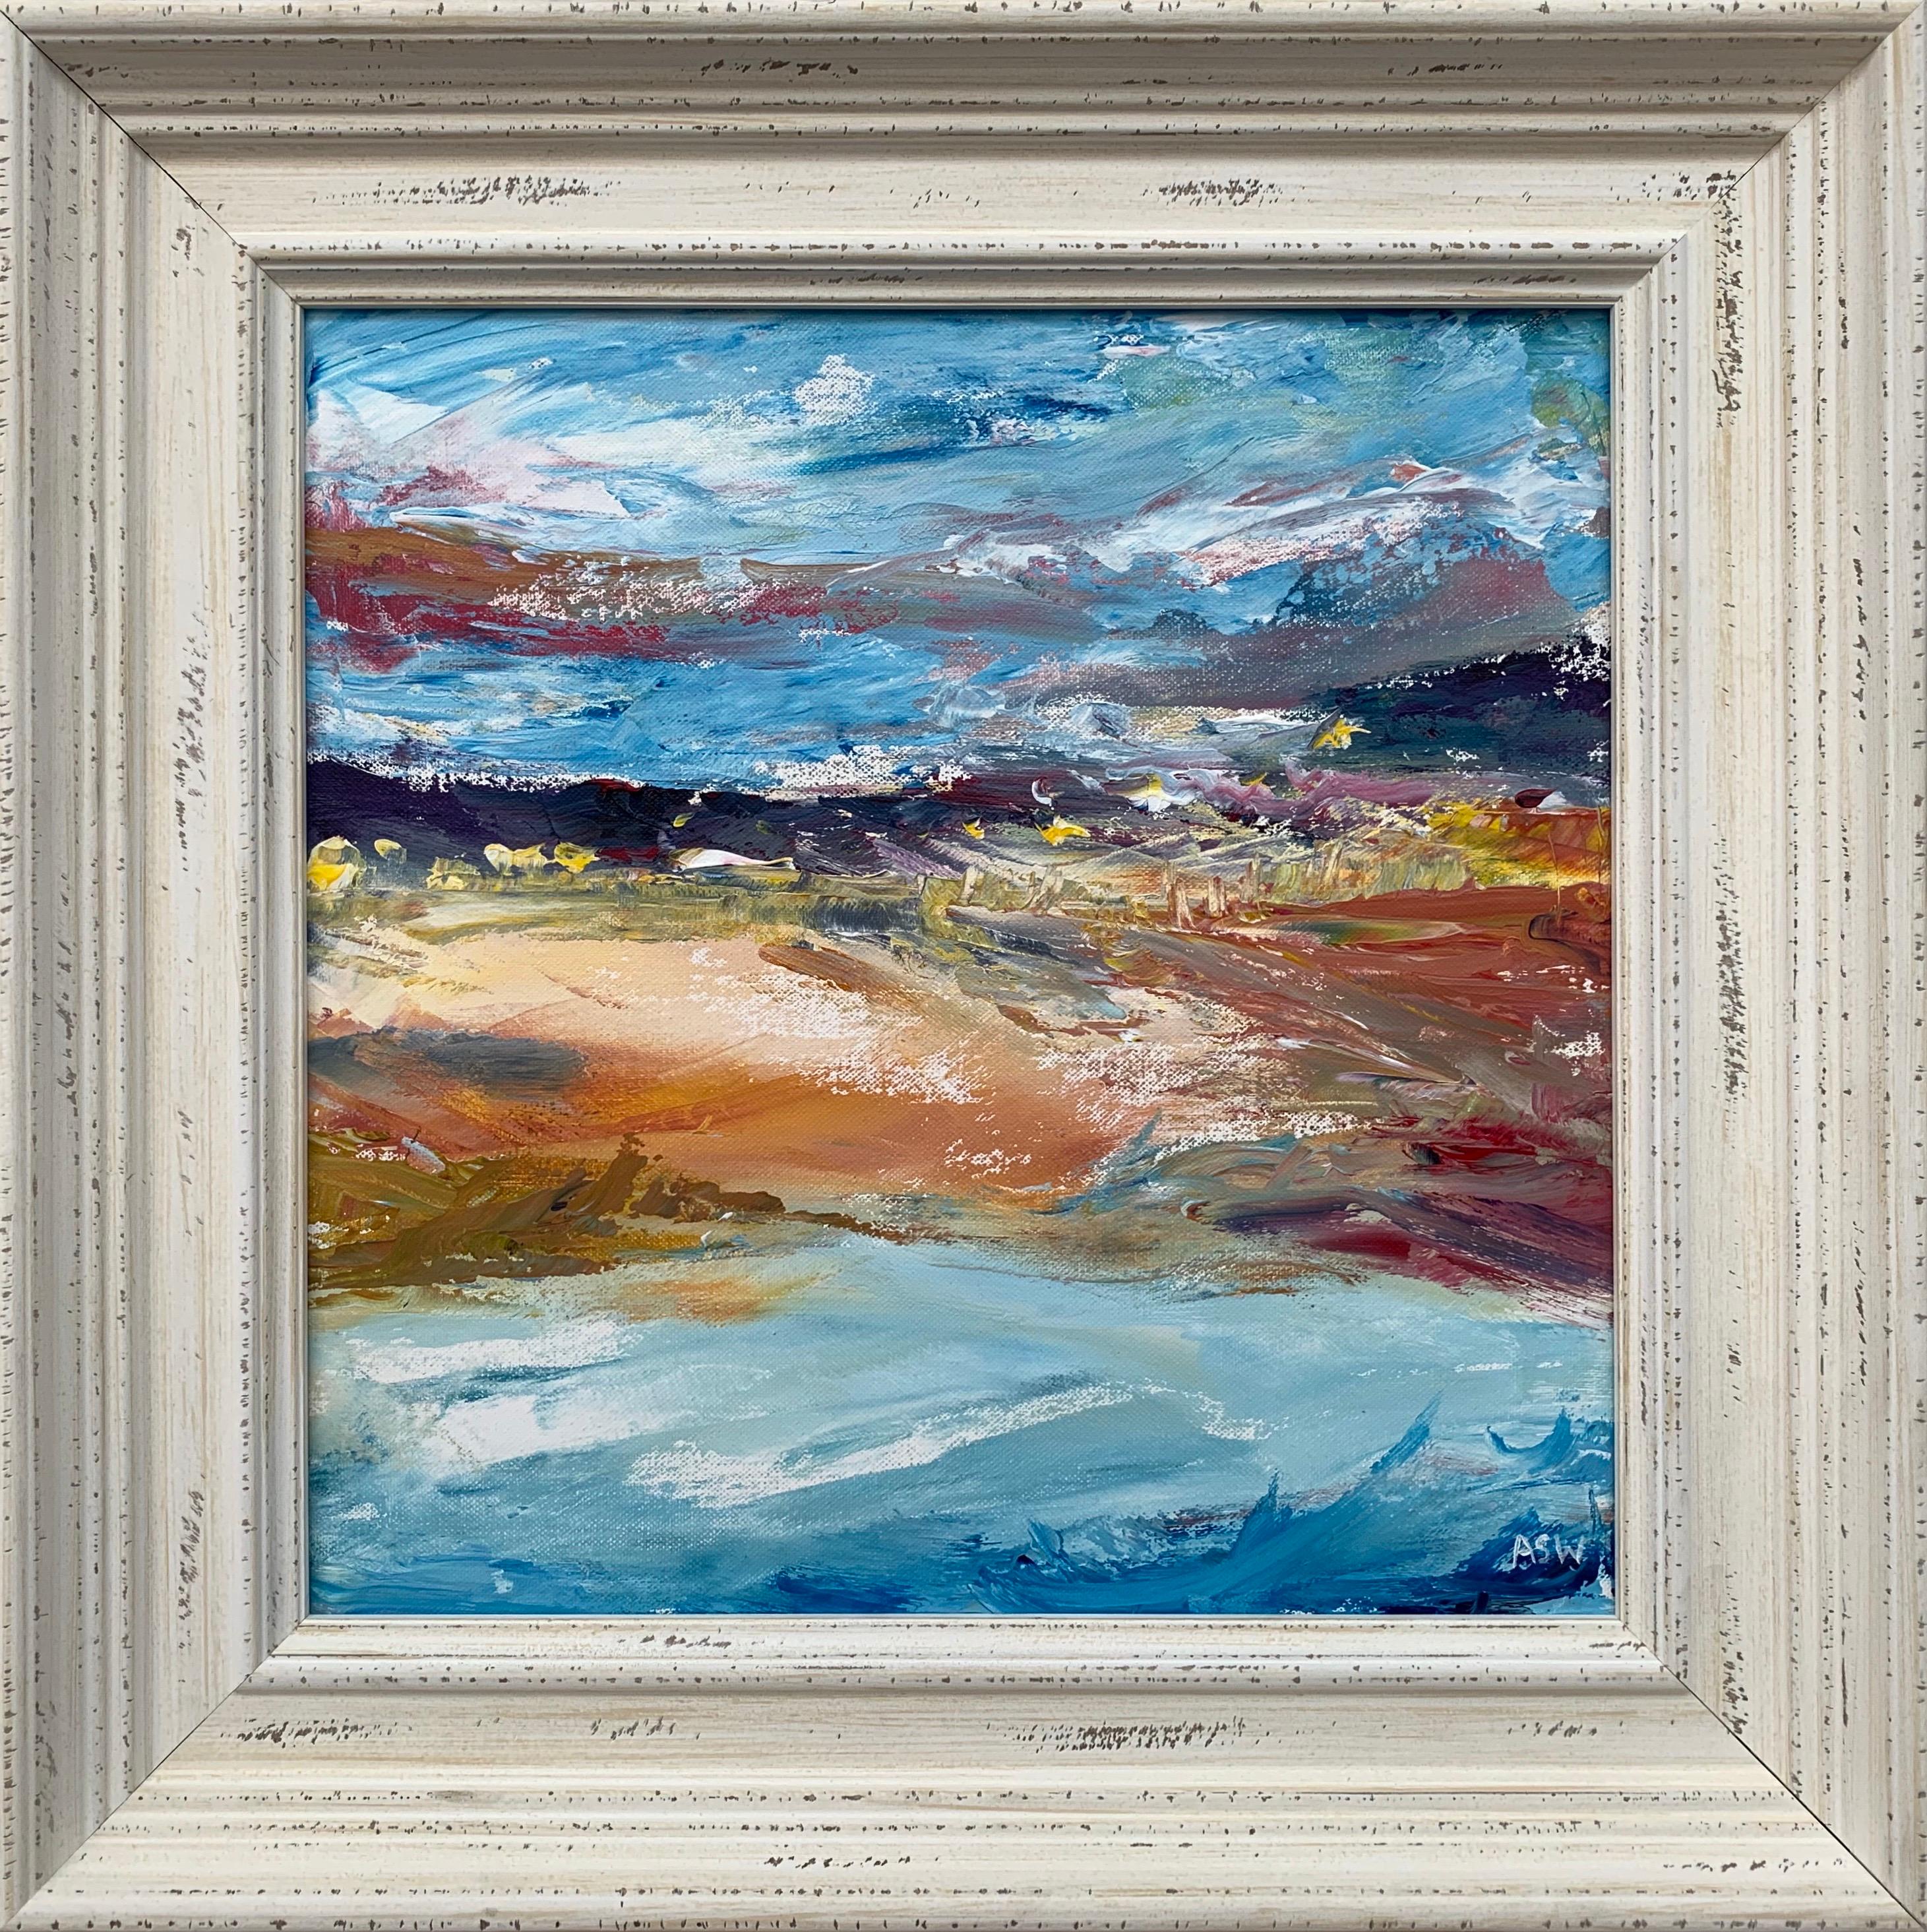 Expressive Abstract River Seascape Landscape by Contemporary British Artist